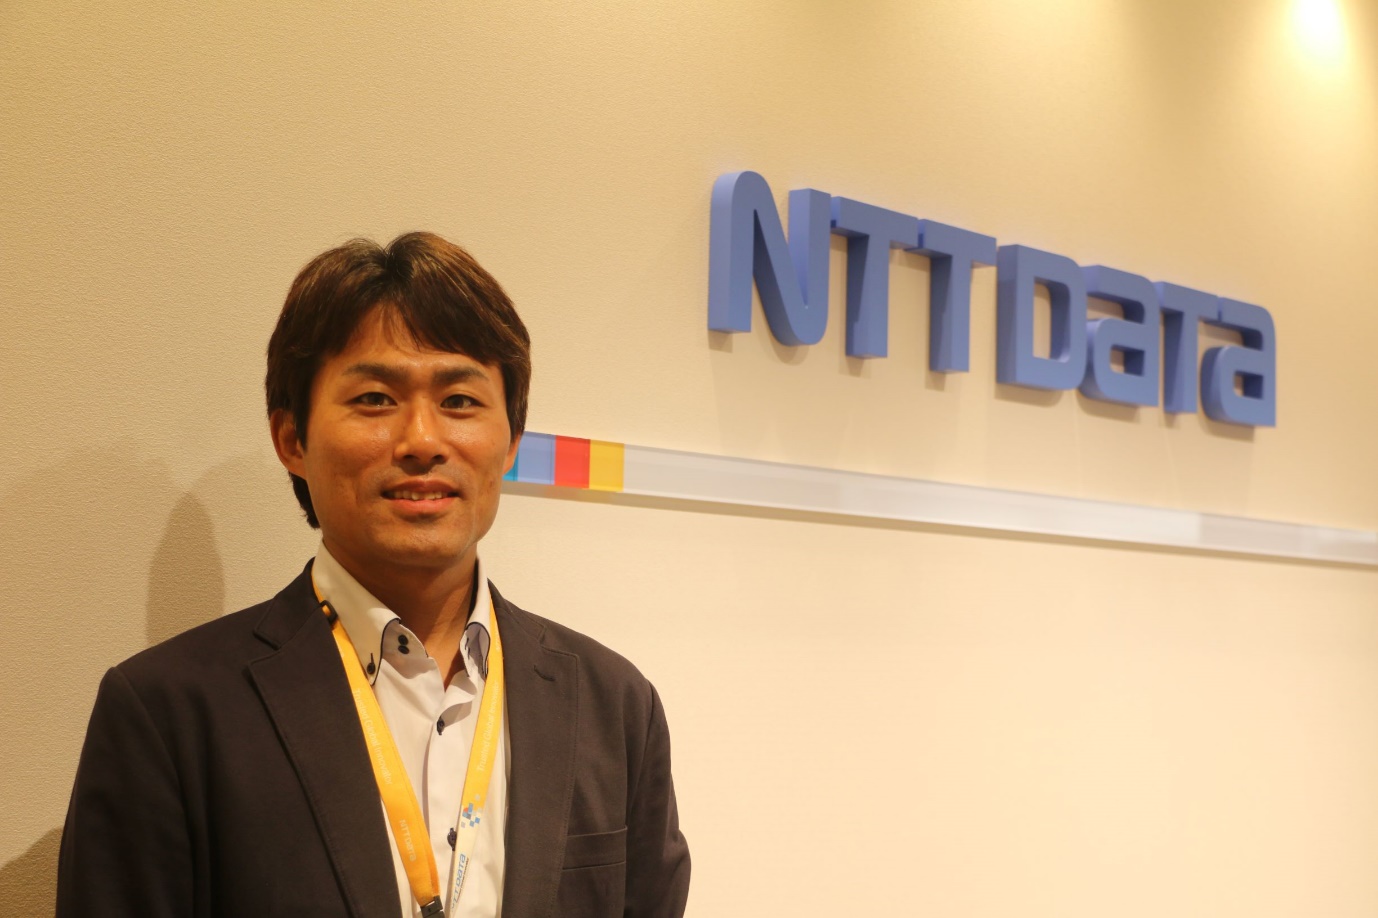 NTT DATA strengthening service quality in South East Asia